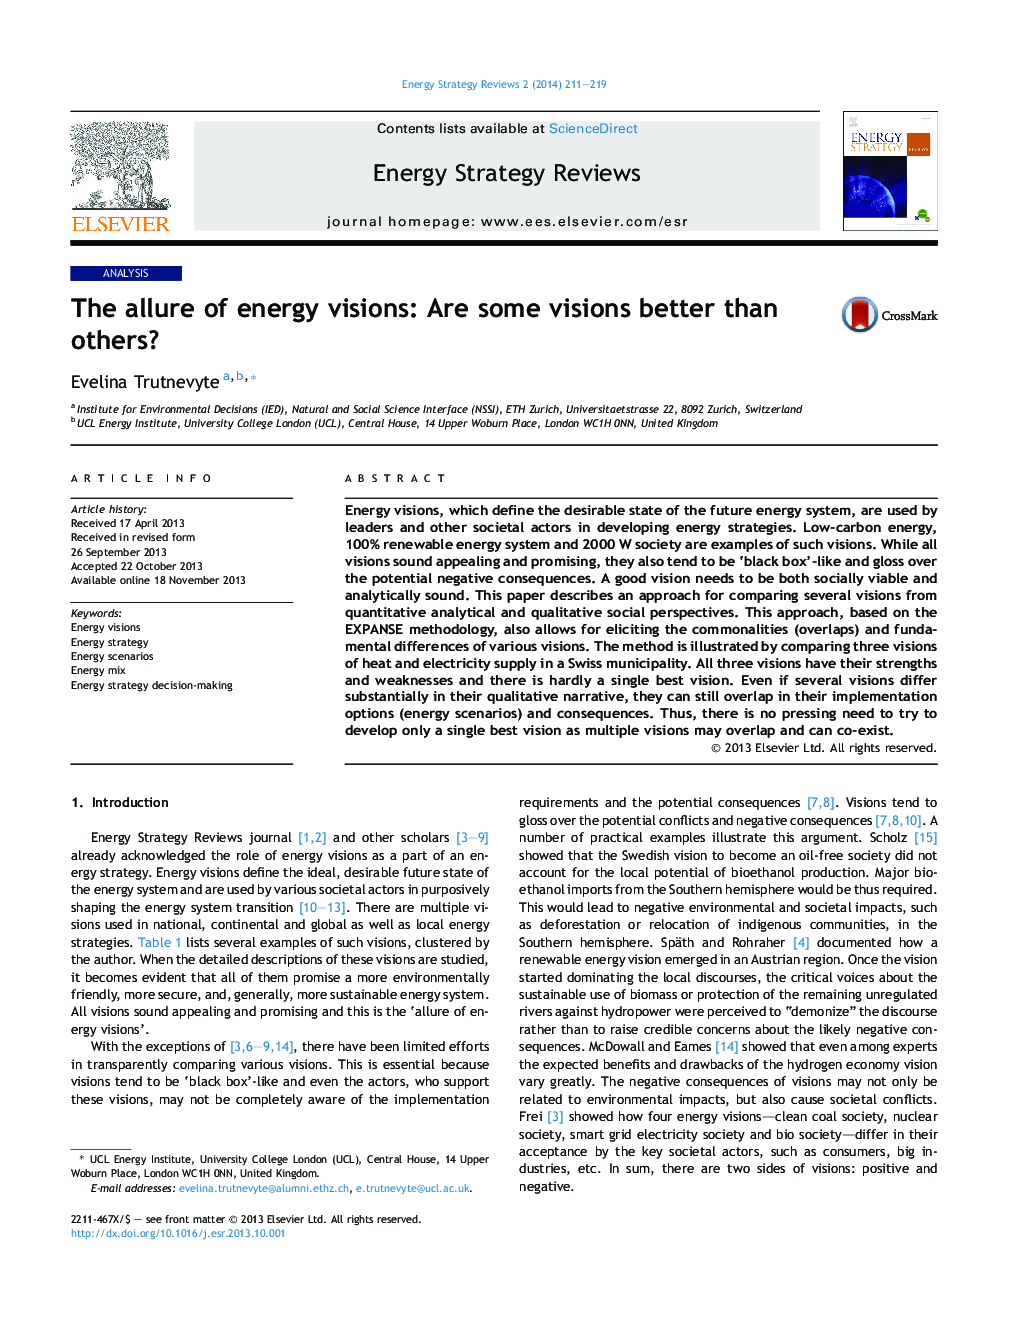 The allure of energy visions: Are some visions better than others?